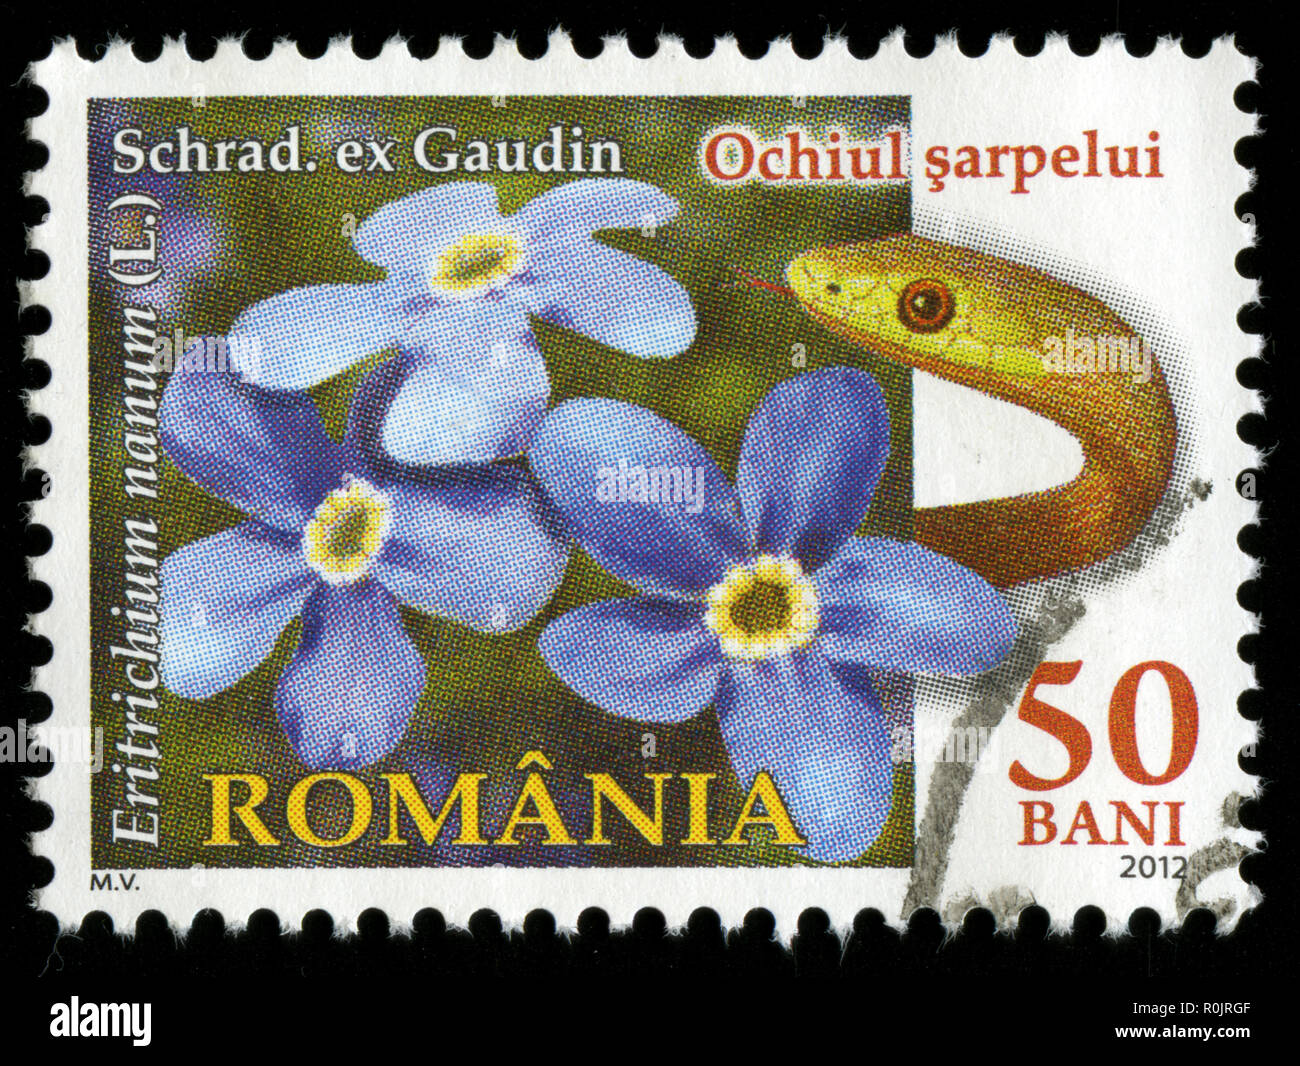 Postage stamp from Romania in the Flora of Romania series issued in 2012 Stock Photo